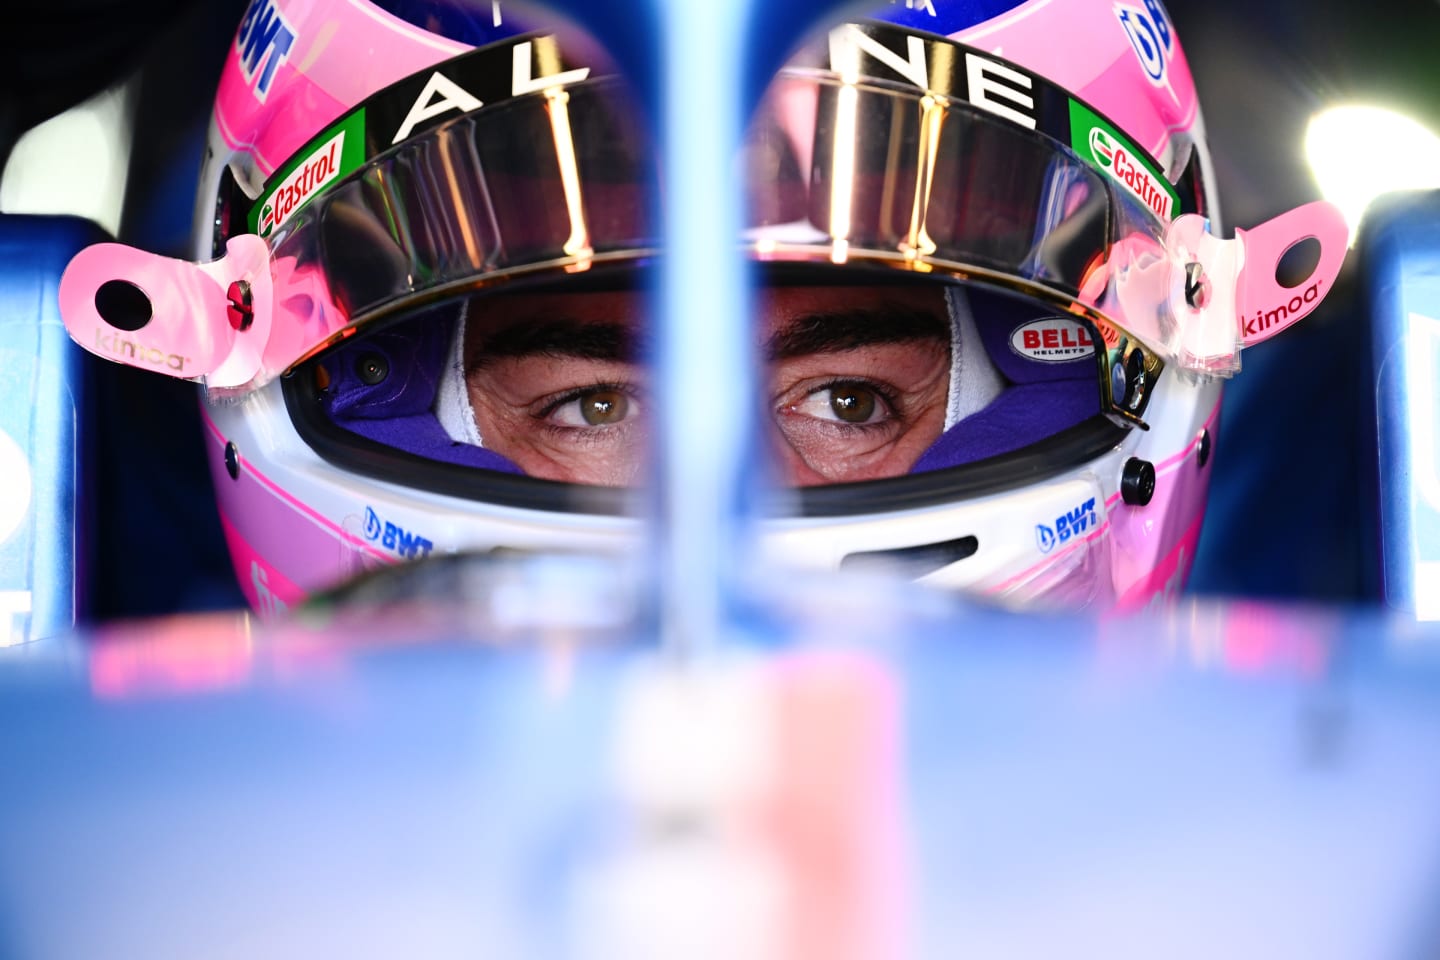 MELBOURNE, AUSTRALIA - APRIL 08: Fernando Alonso of Spain and Alpine F1 prepares to drive in the garage during practice ahead of the F1 Grand Prix of Australia at Melbourne Grand Prix Circuit on April 08, 2022 in Melbourne, Australia. (Photo by Clive Mason/Getty Images)